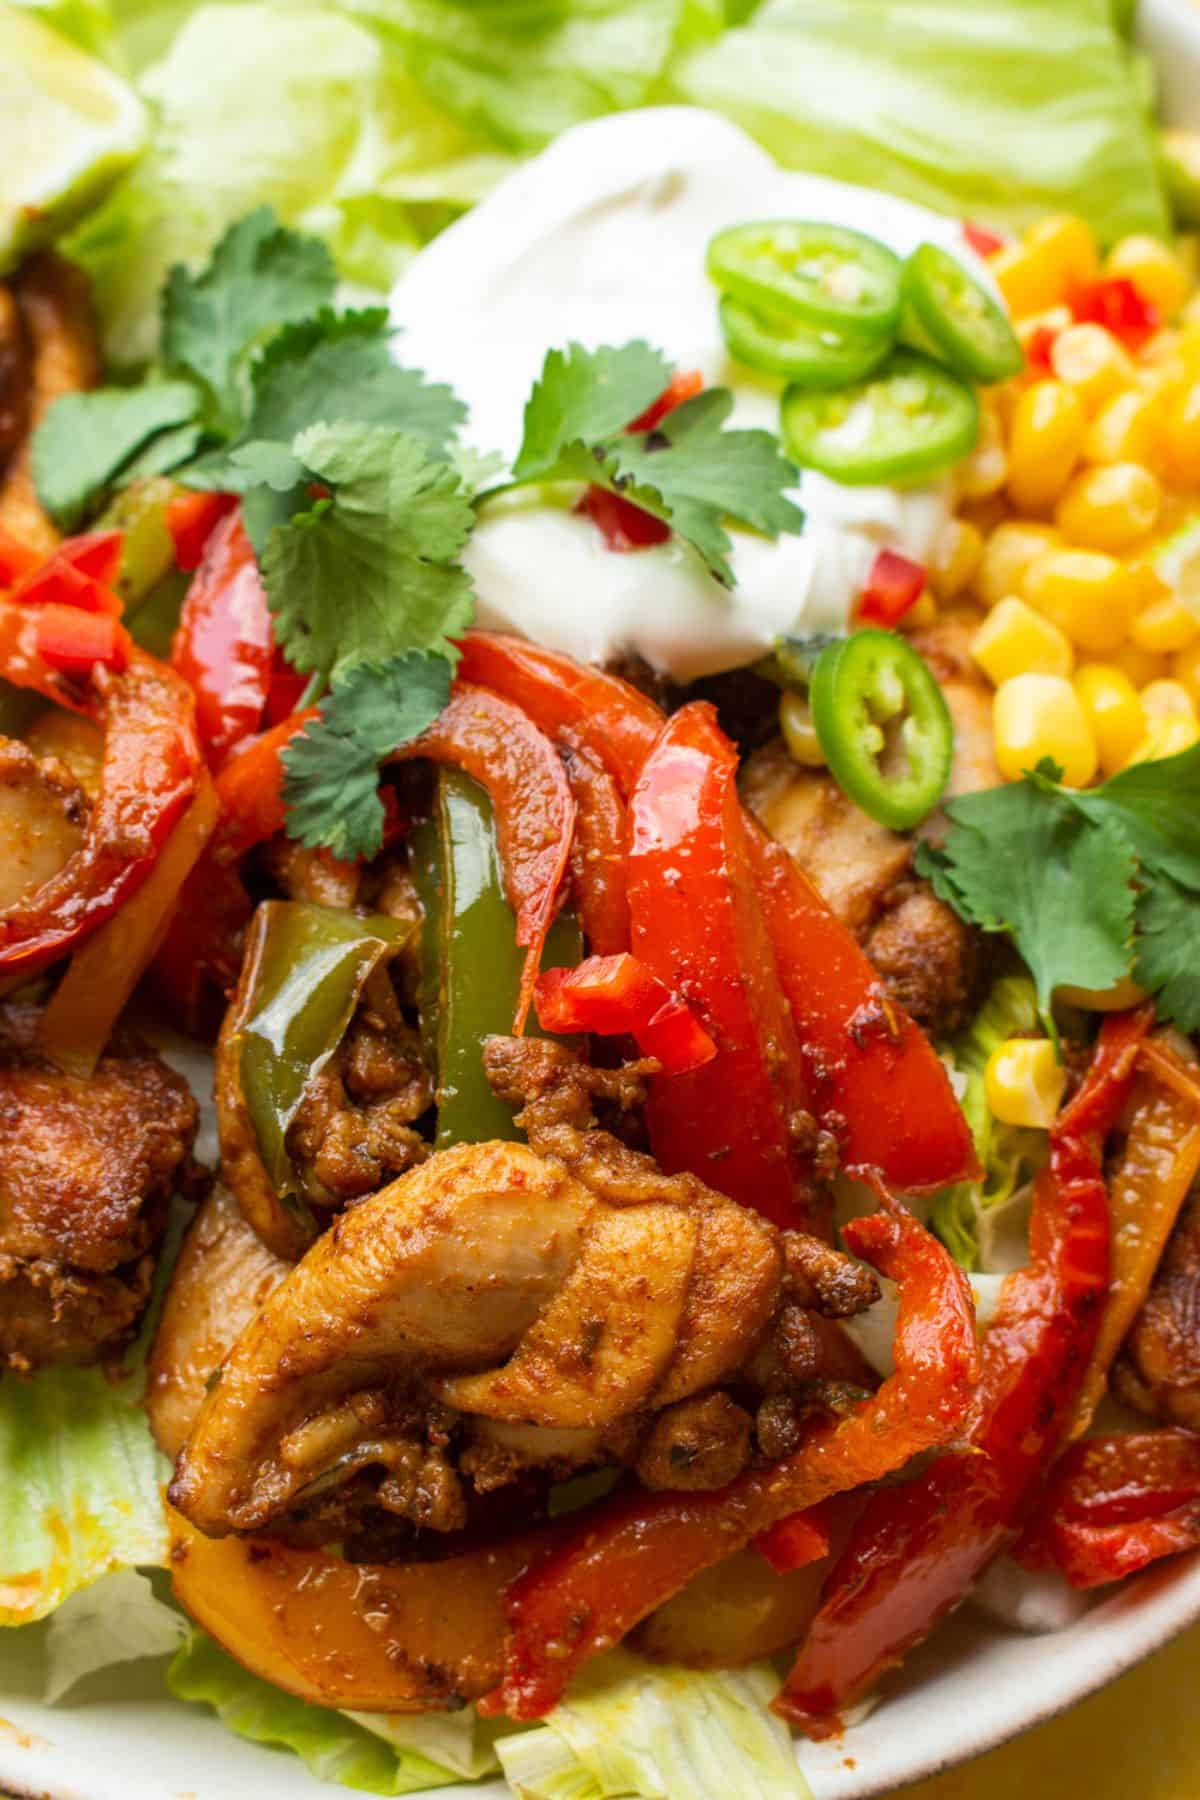 Close up shot of chicken fajita ingredients with salad topped with sweet corn, sour cream and green chillies.